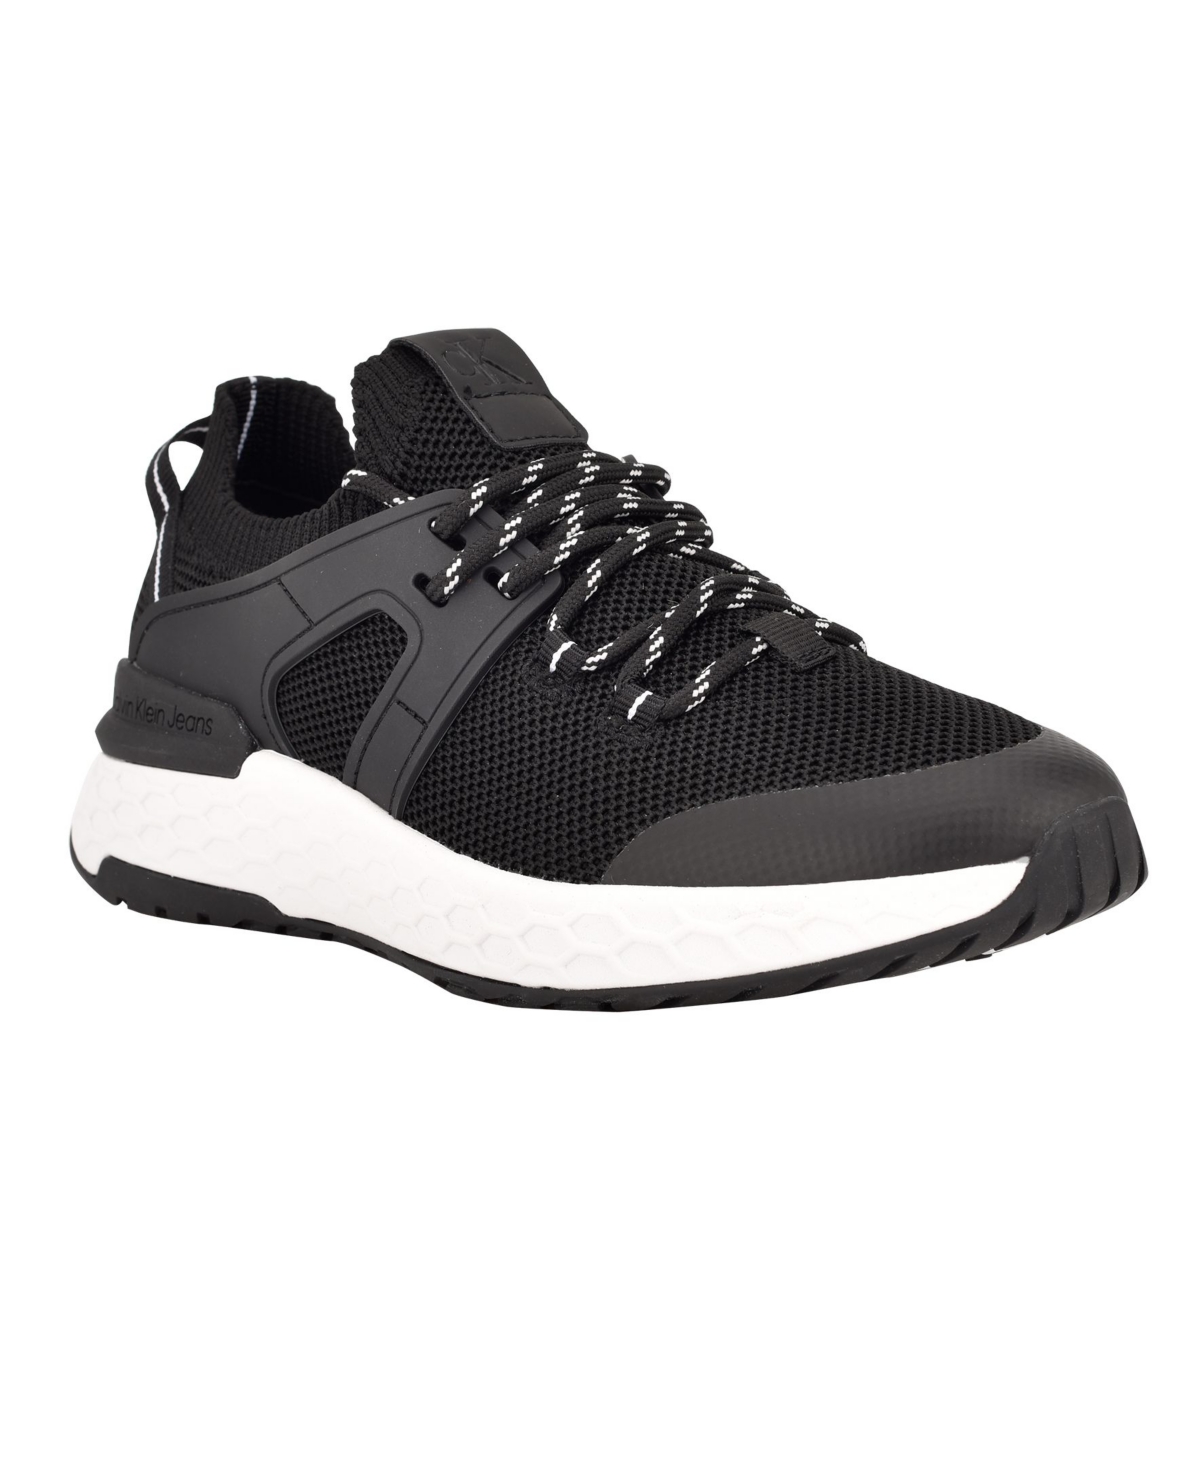 UPC 195972002357 product image for Calvin Klein Women's Aleah Lace-Up Sneakers Women's Shoes | upcitemdb.com